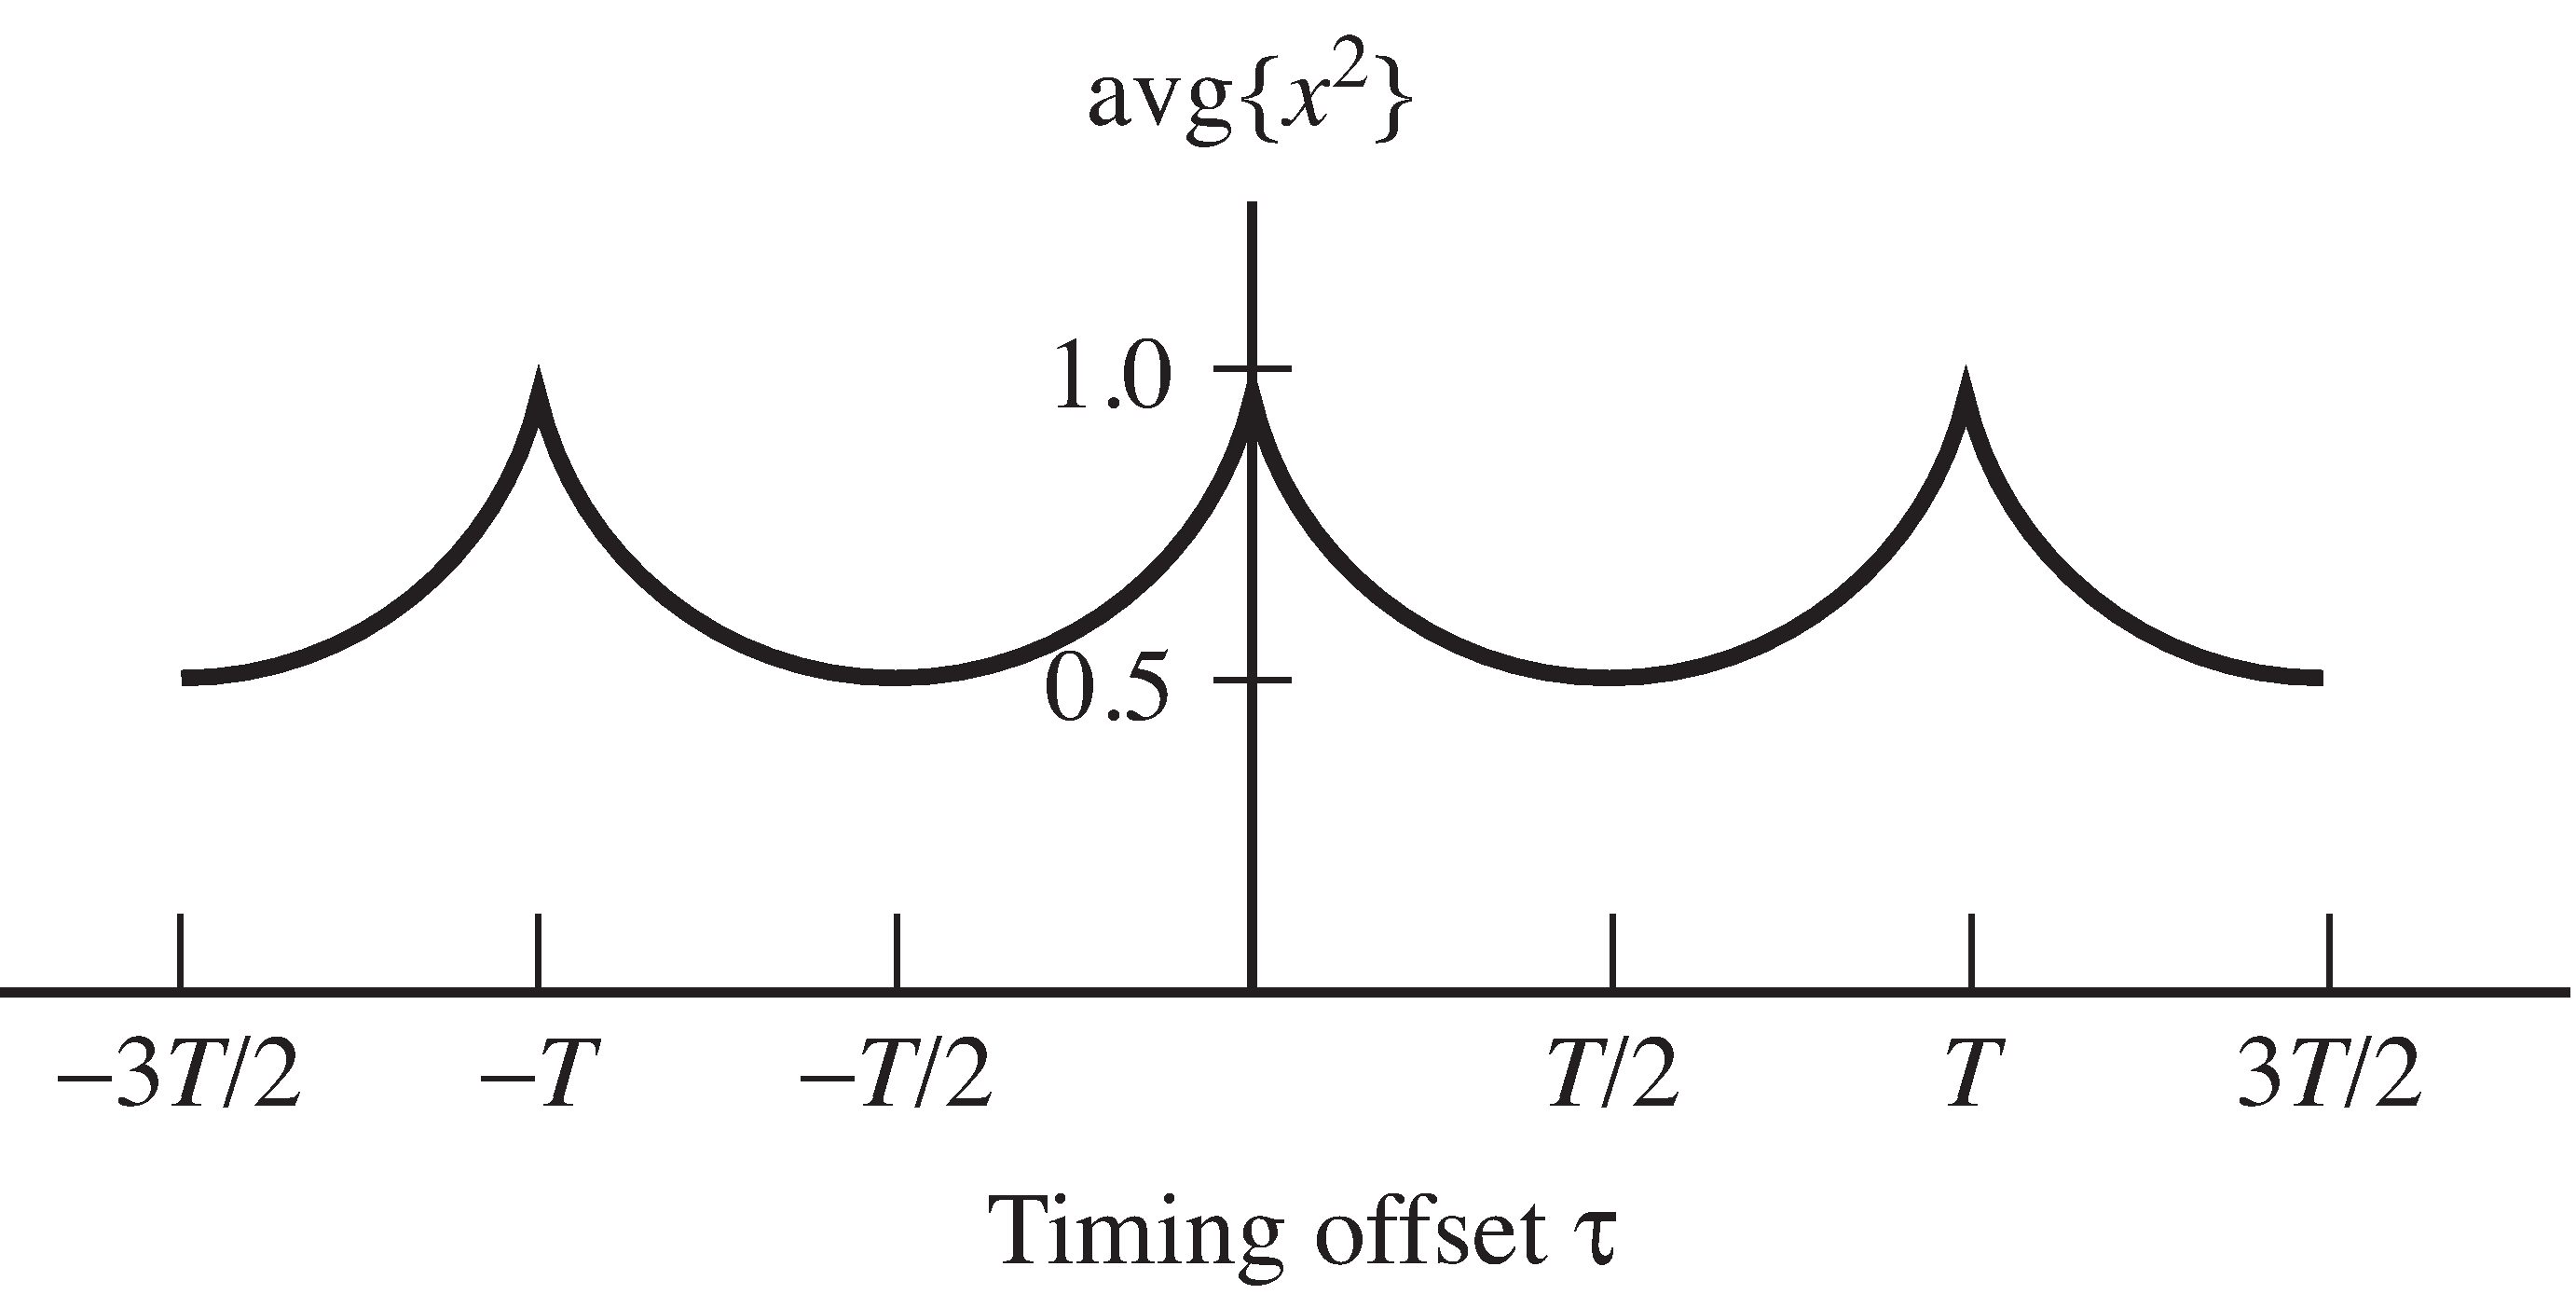 Average squared output as a function of timing offset τ.